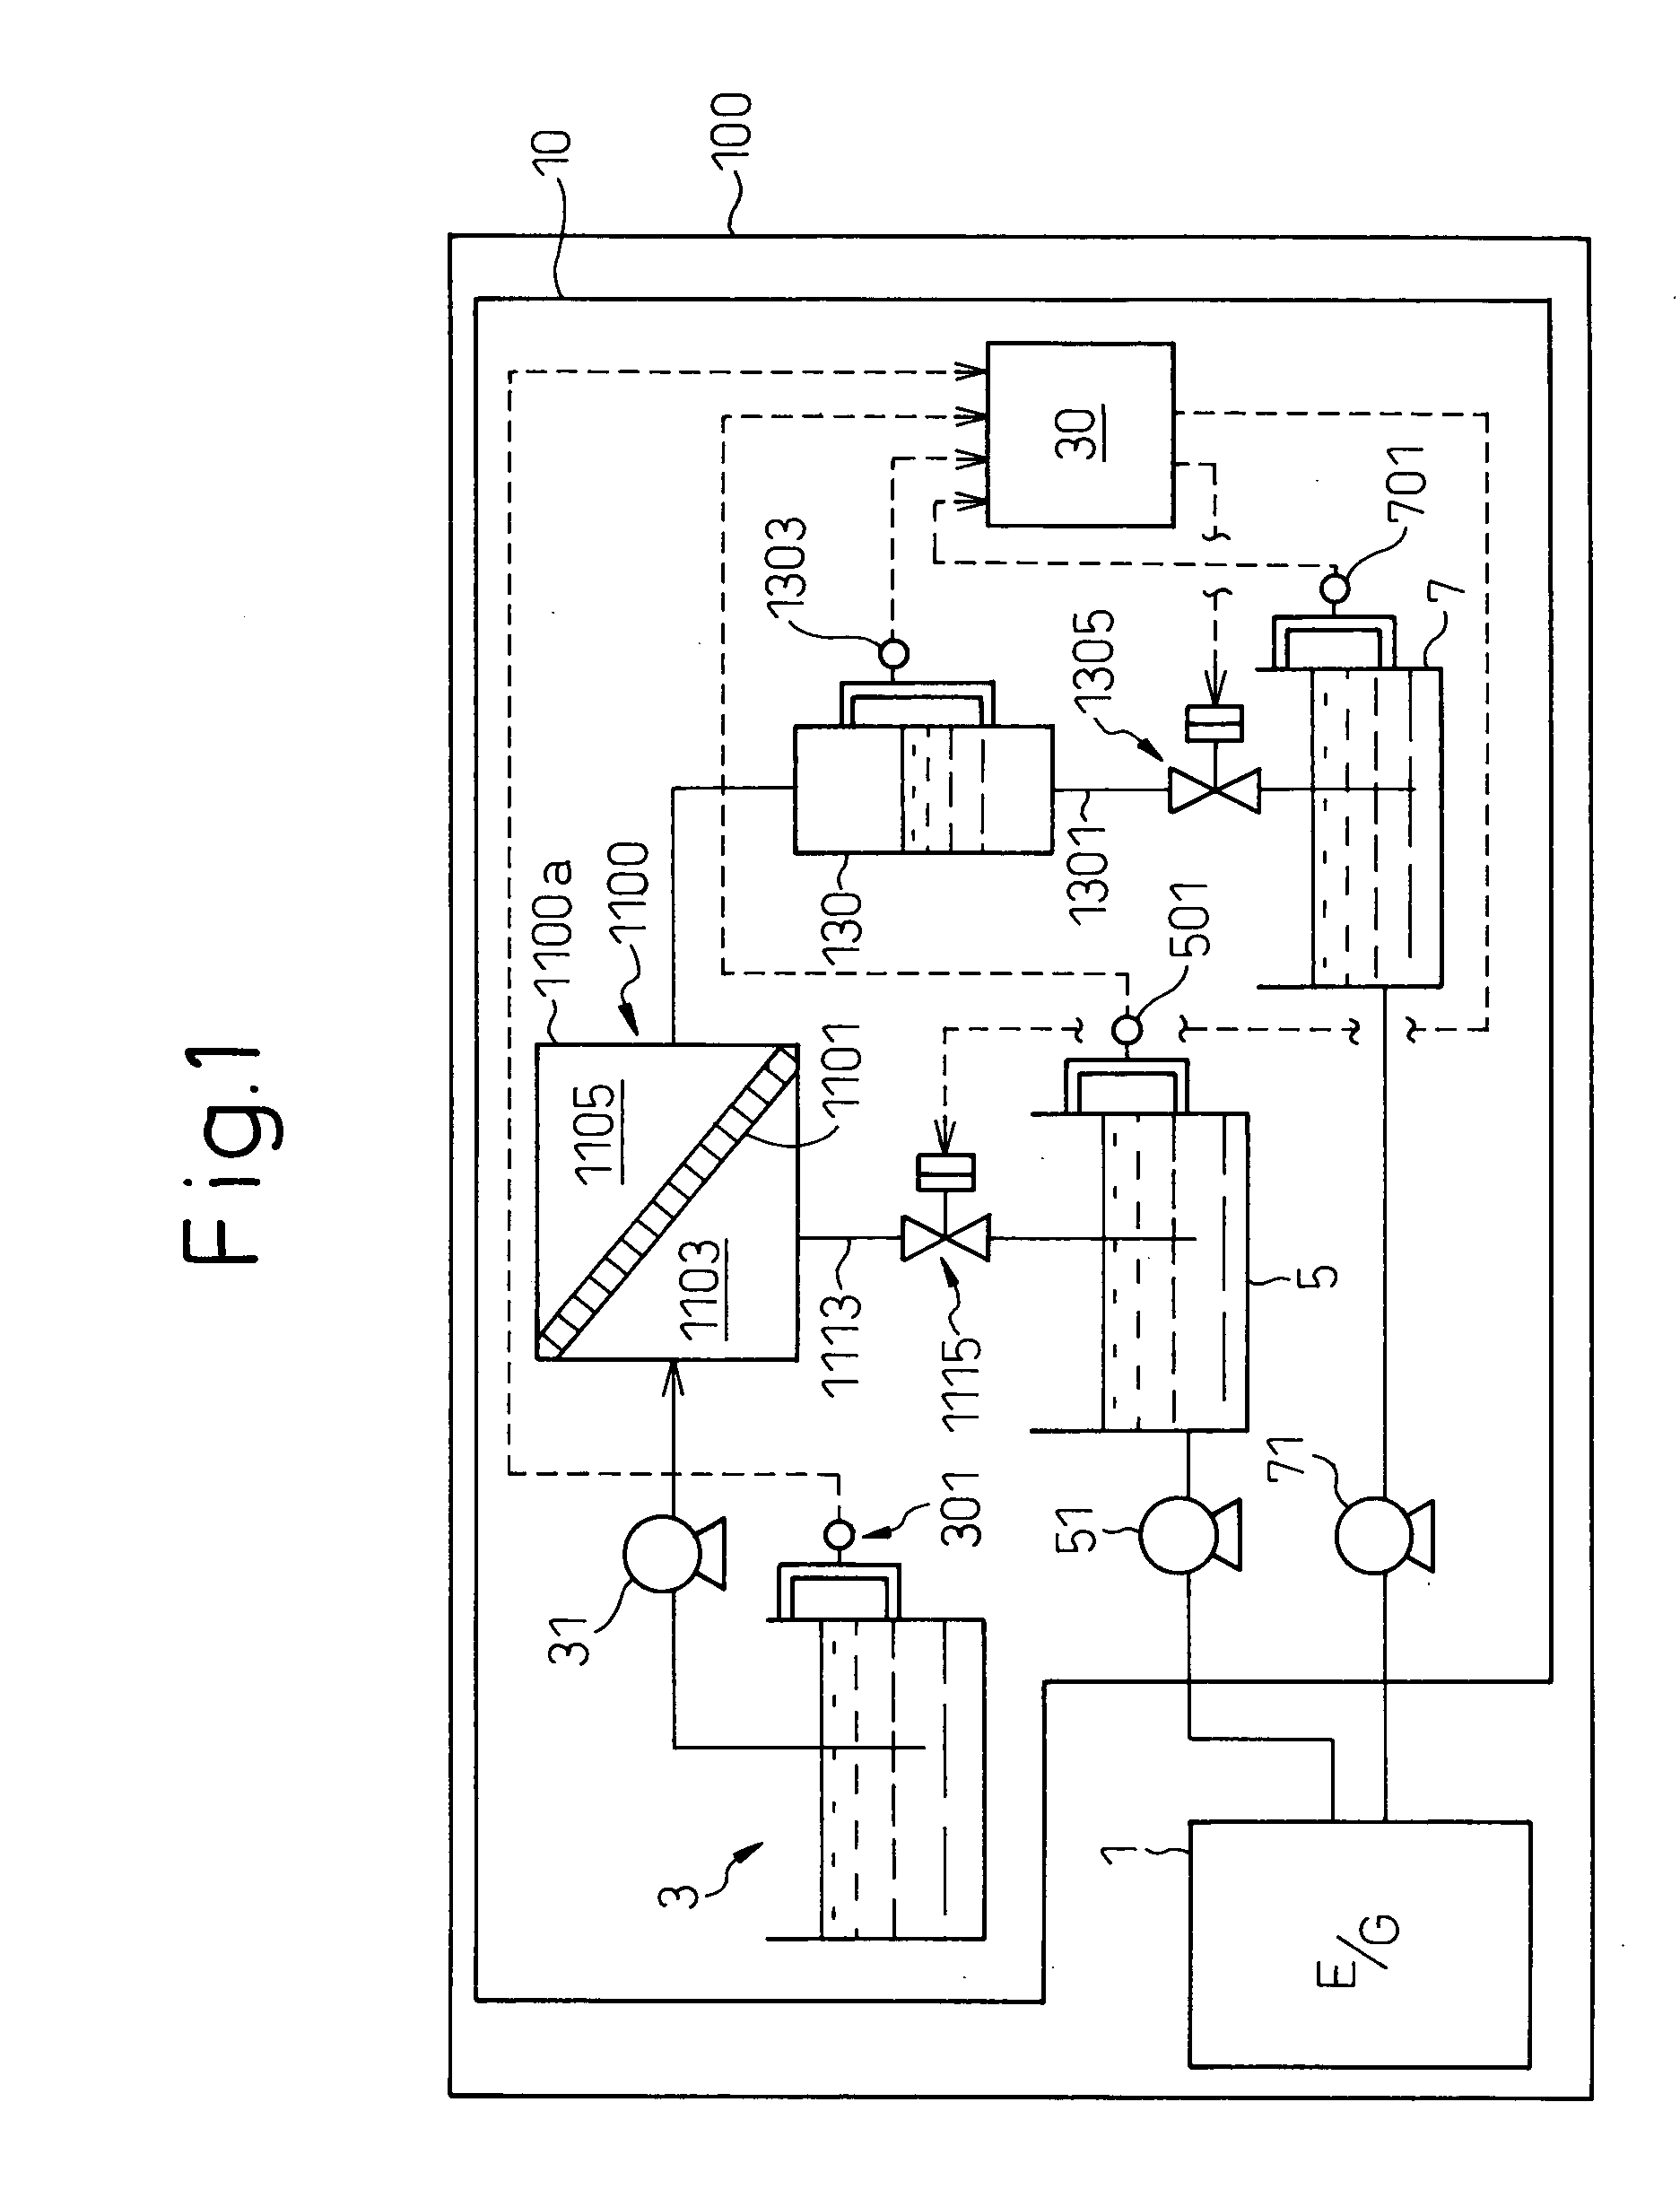 Onboard fuel separation apparatus for an automobile